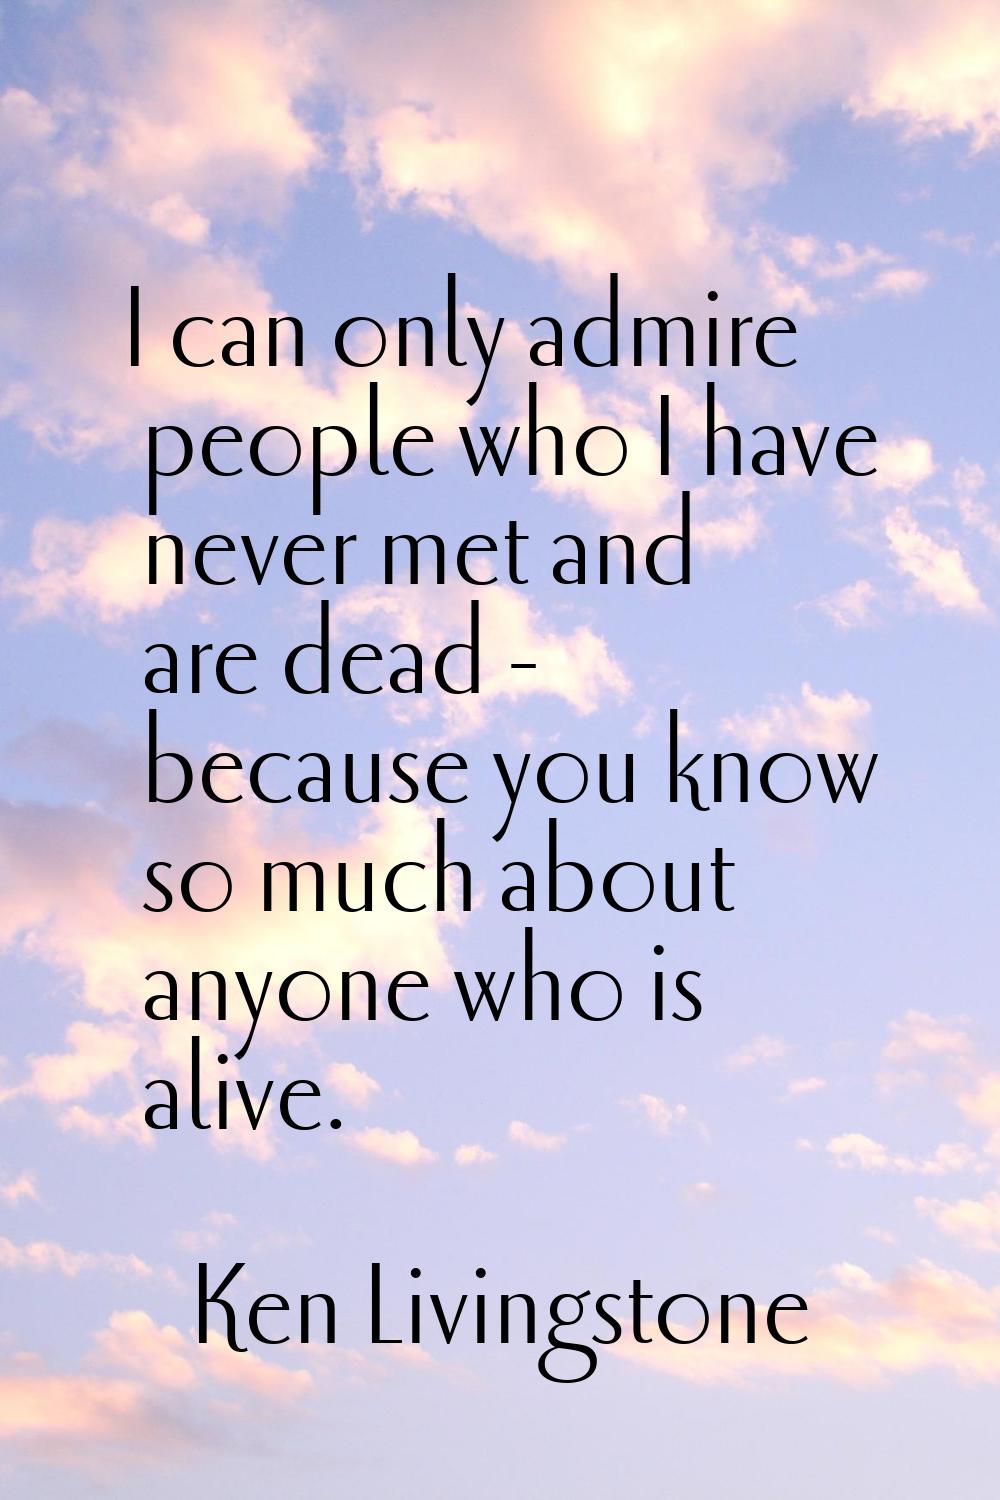 I can only admire people who I have never met and are dead - because you know so much about anyone 